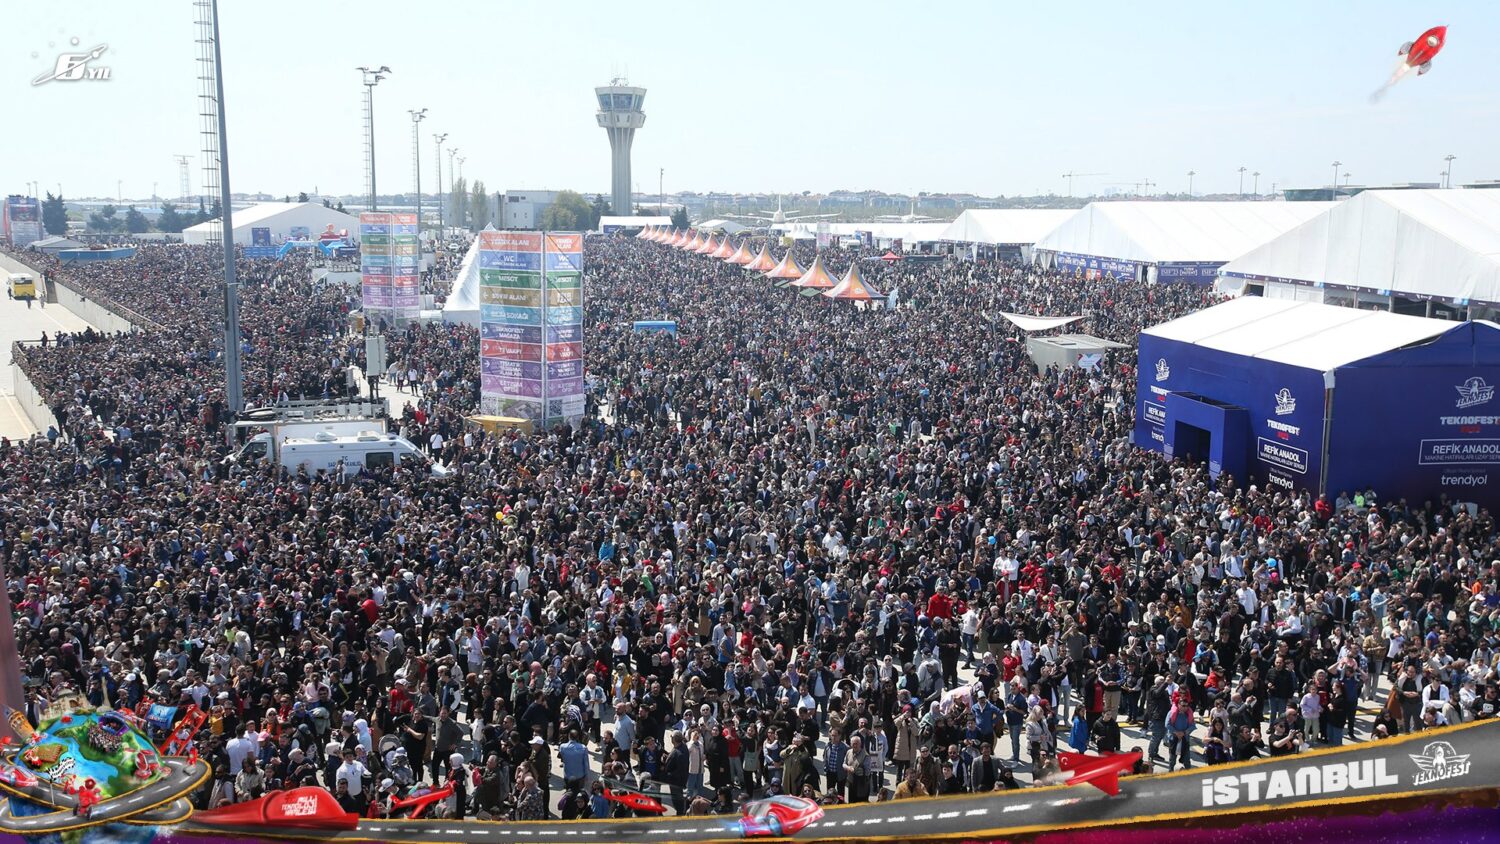 2.5 million spectators attend one of the world’s biggest ever airshows in Istanbul